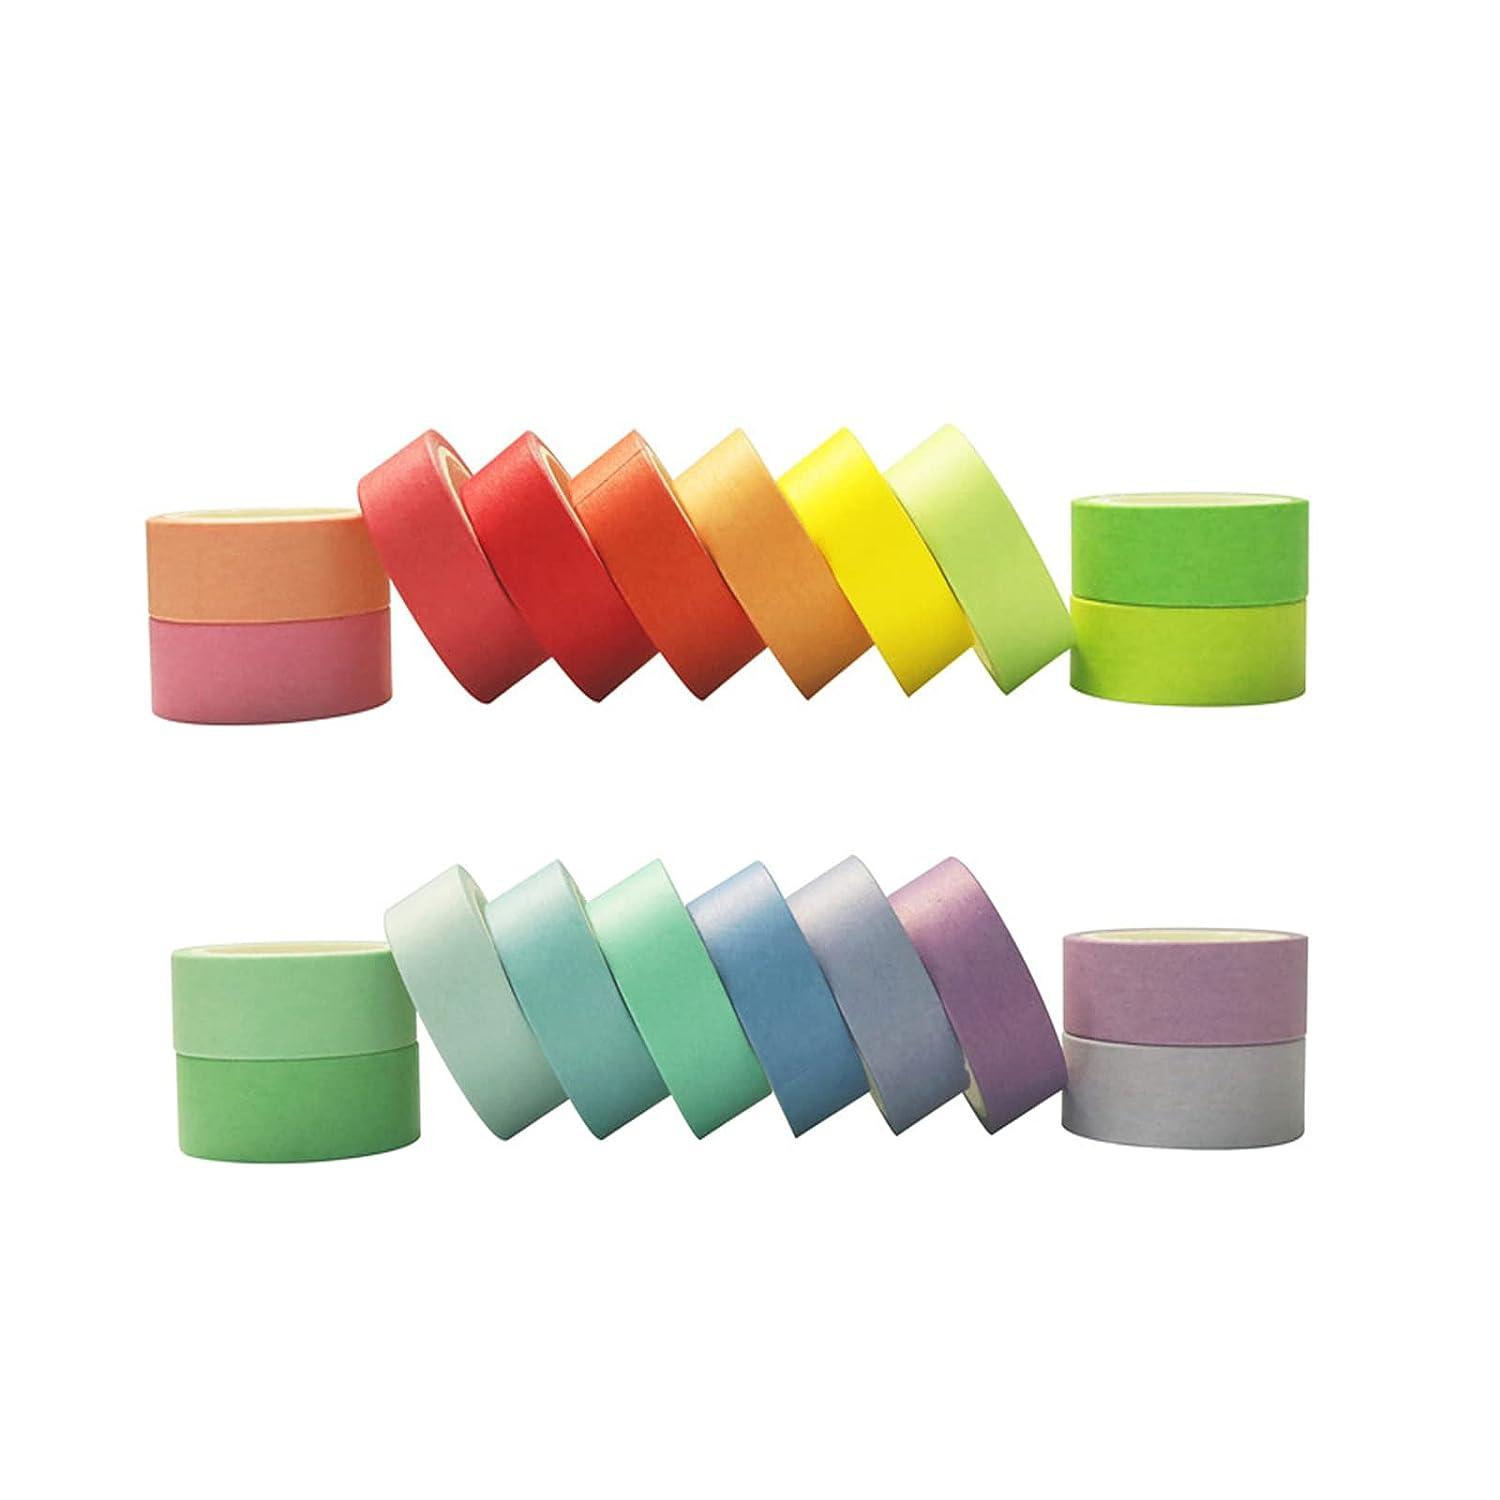 Recollections Rainbow Crafting Washi Tape - Each